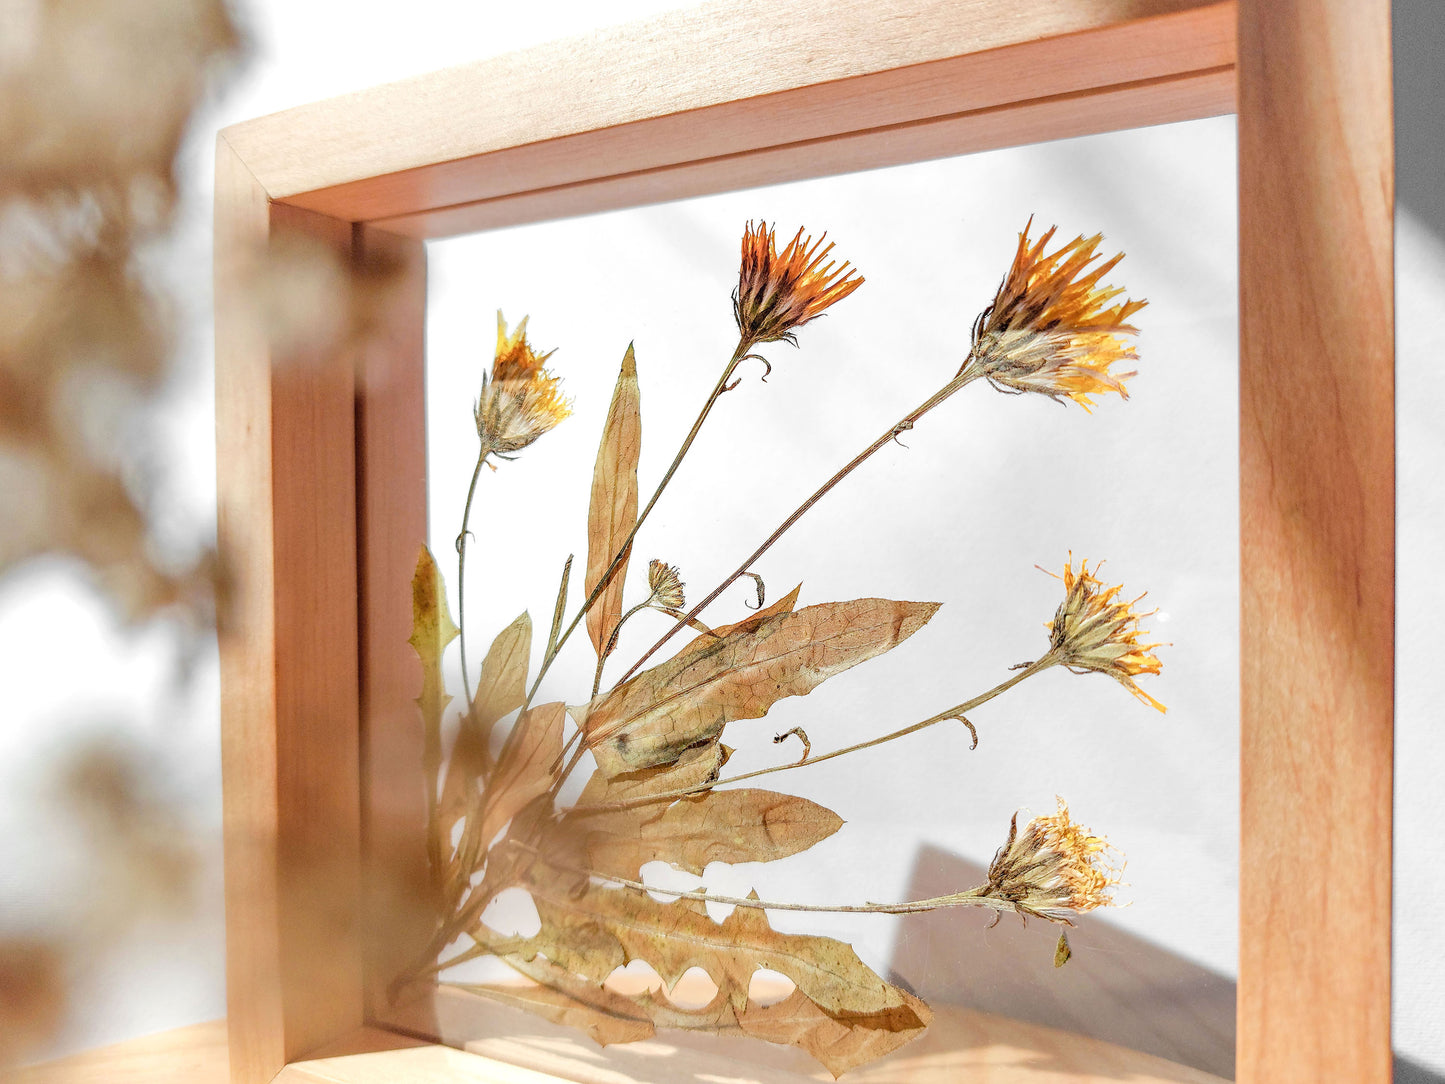 Real wild yellow pressed flower and plant artwork with wooden square frame for Nature lover gift